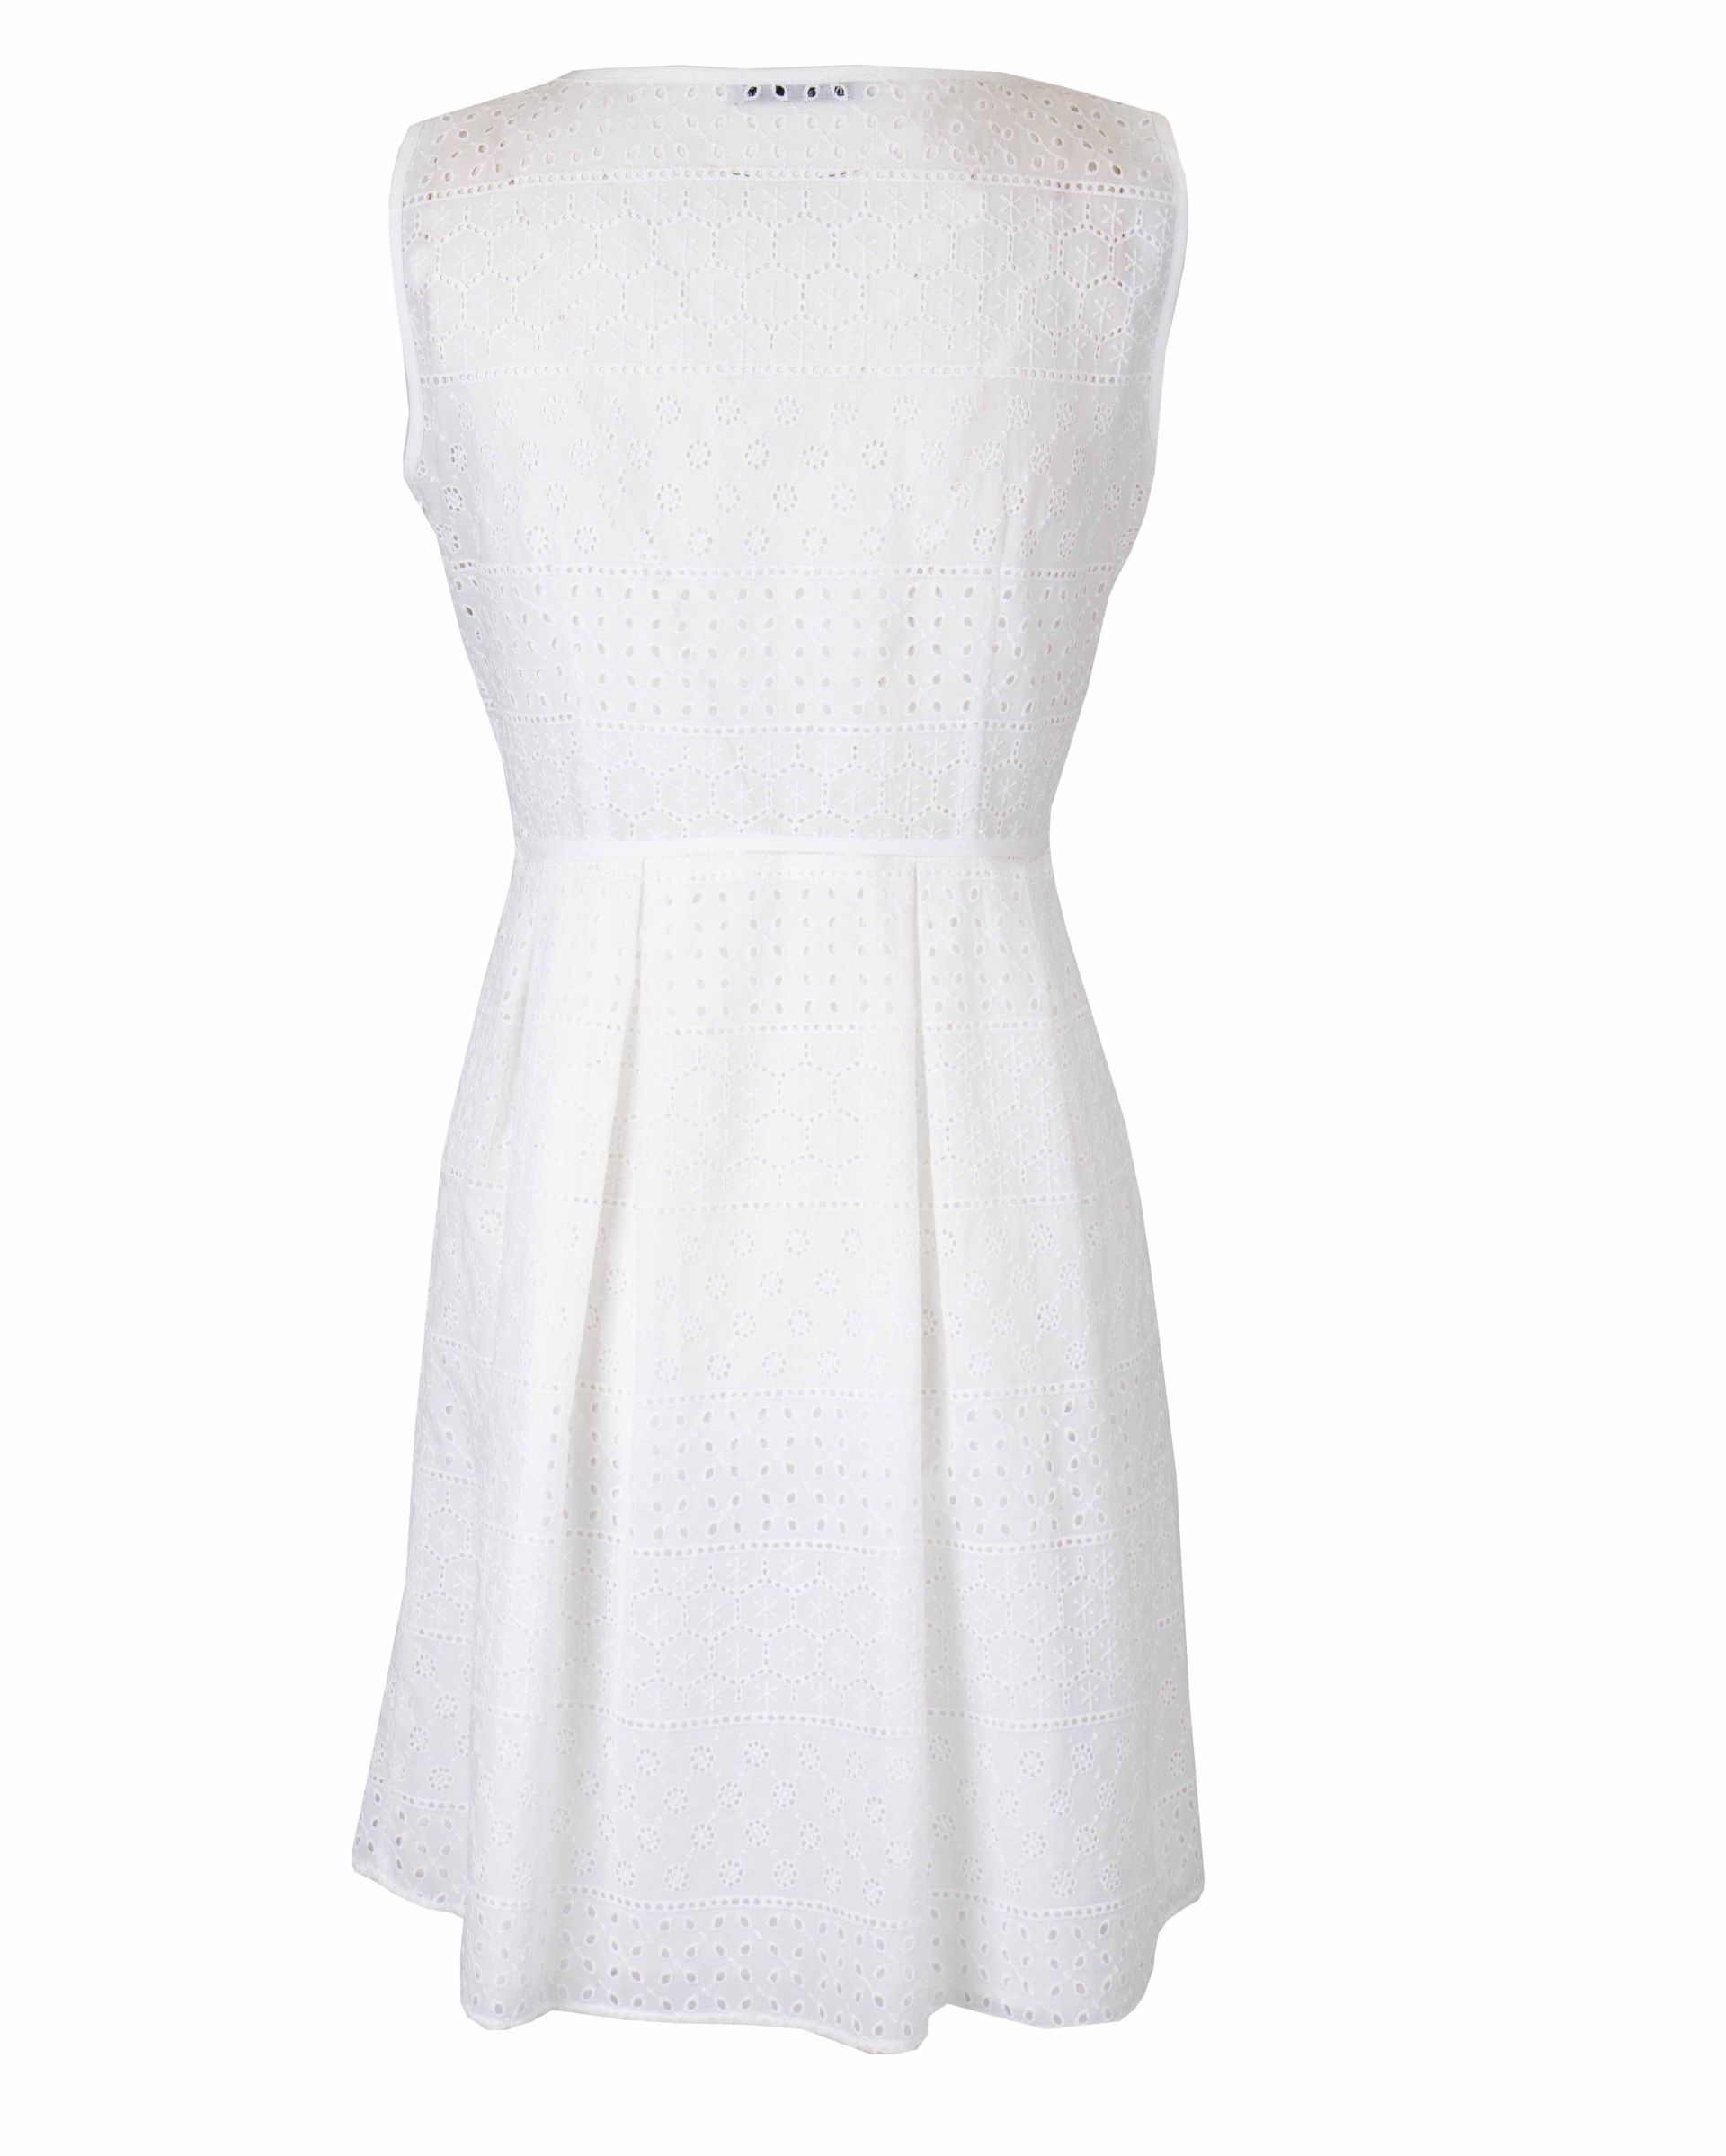 Cotton dress with English embroidery 1